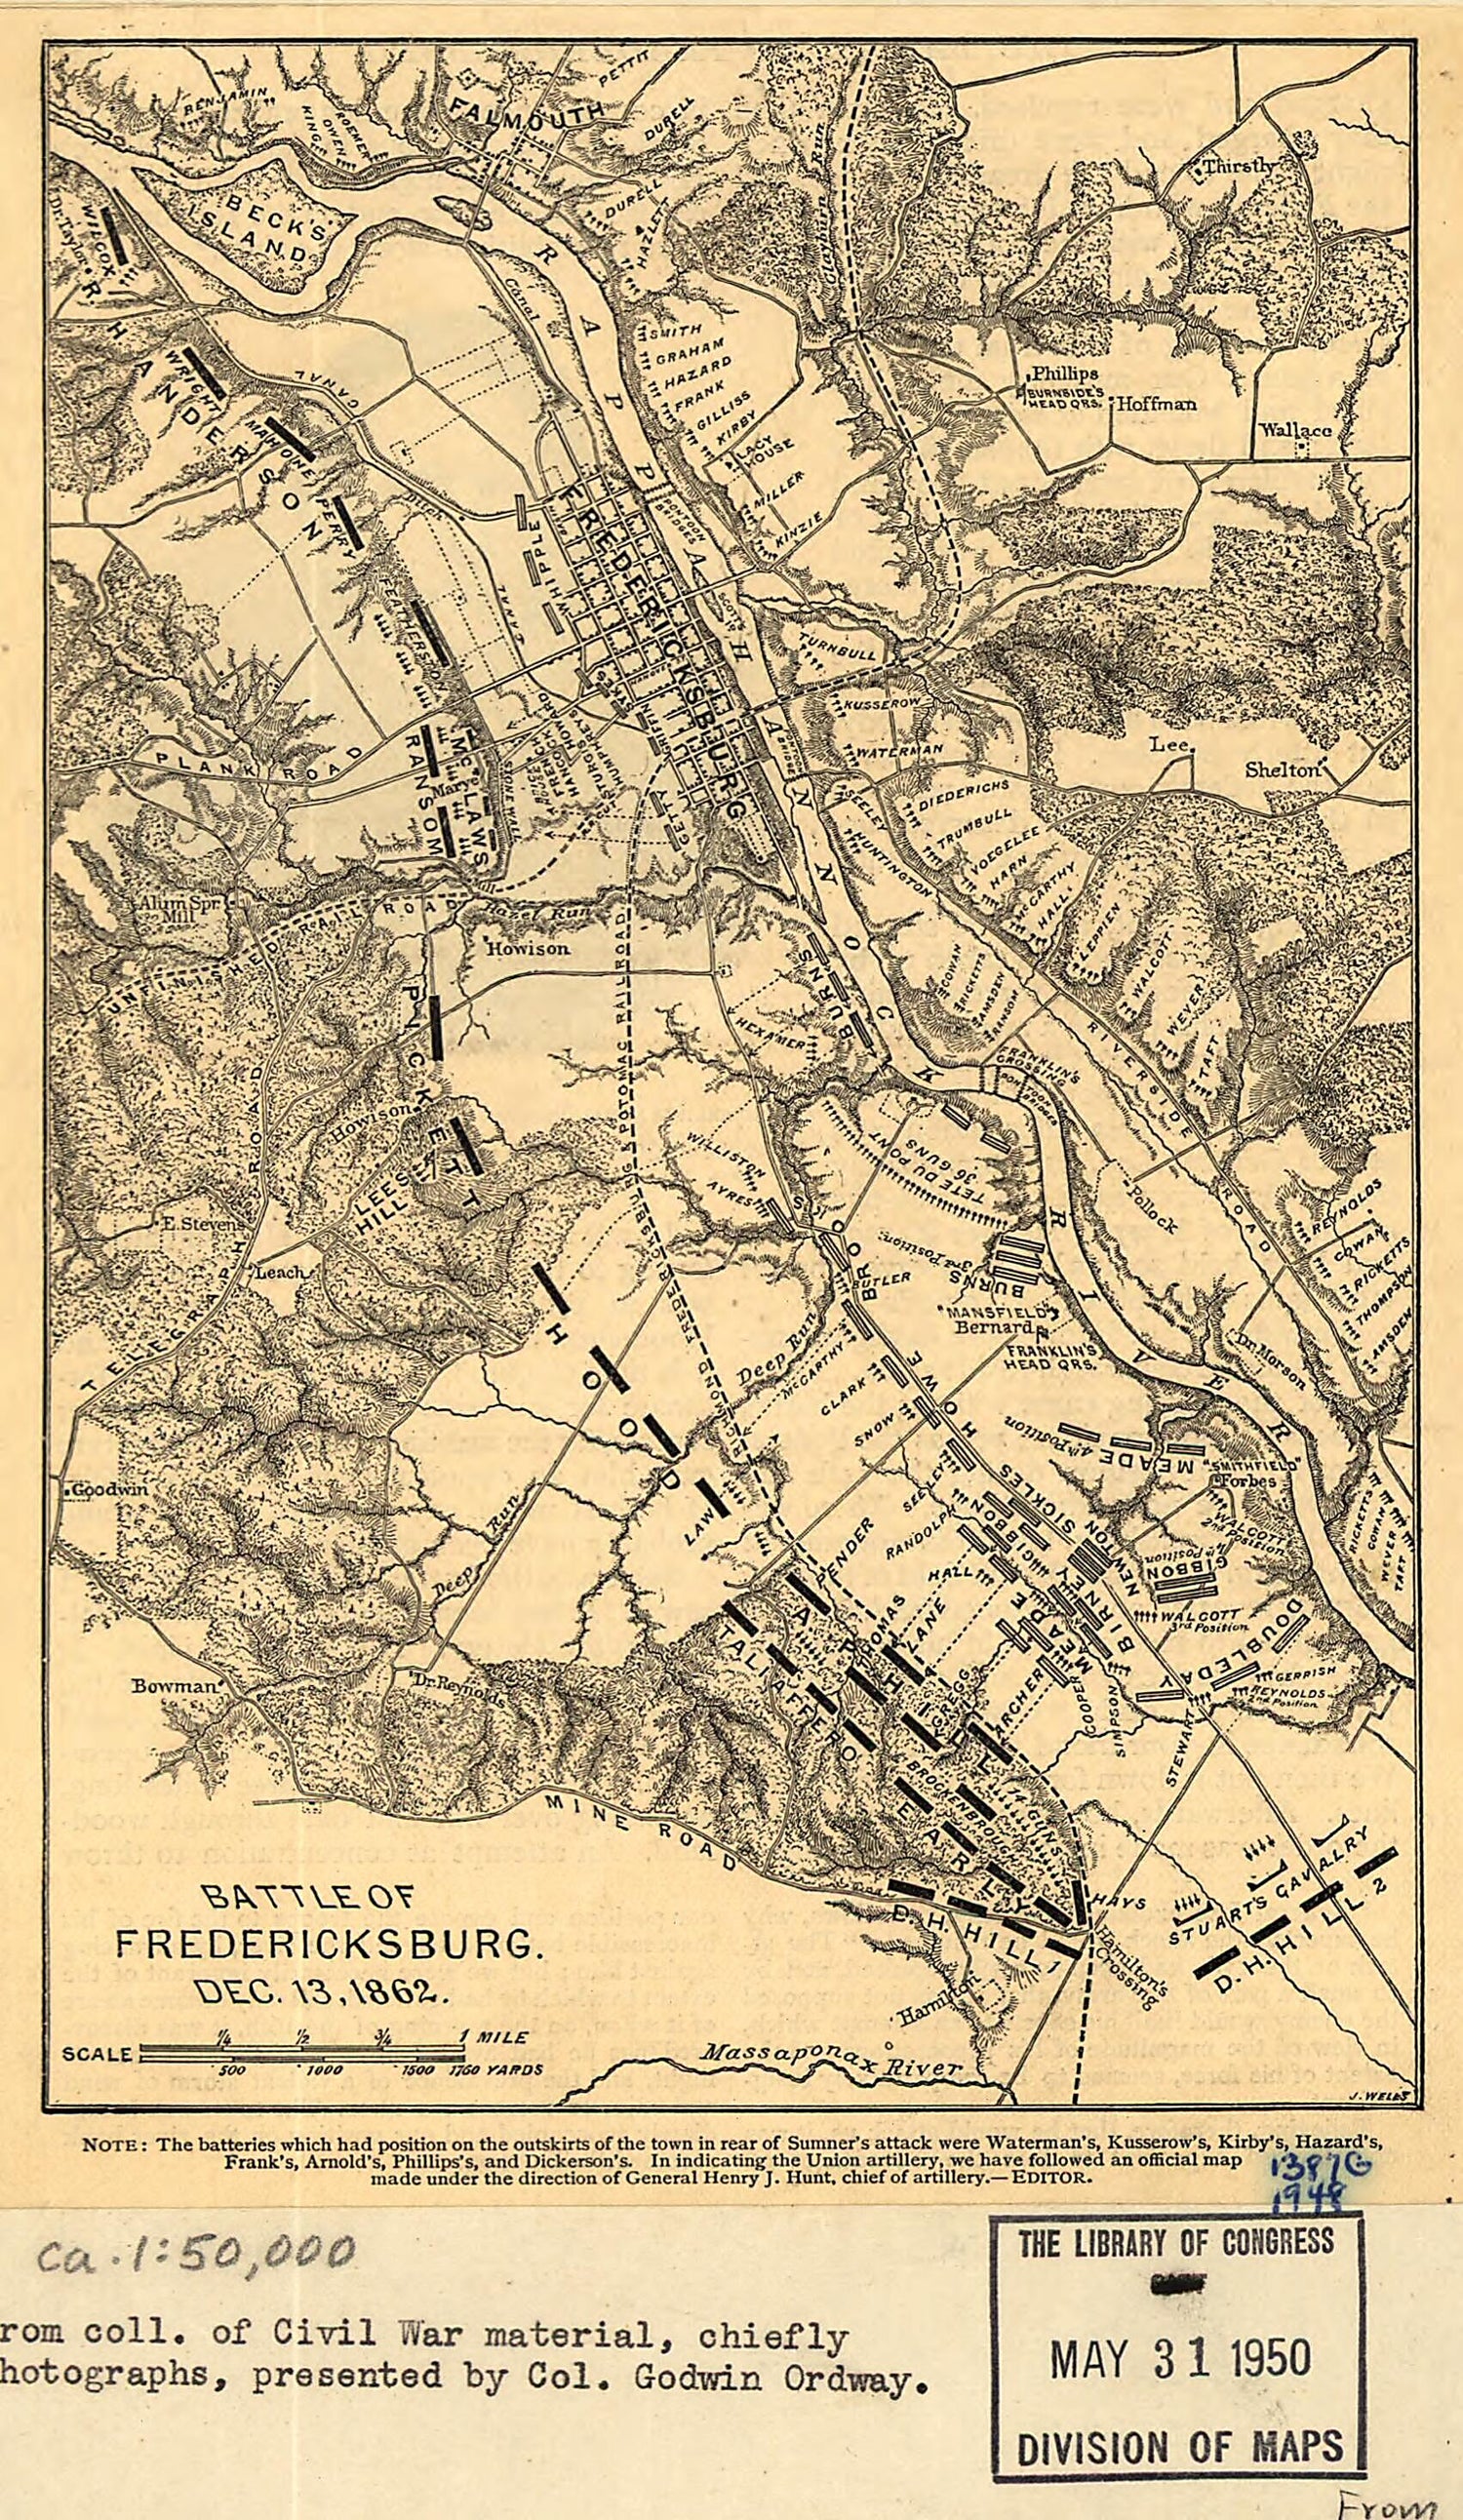 This old map of Battle of Fredericksburg. Dec. 13, from 1862 was created by Jacob Wells in 1862